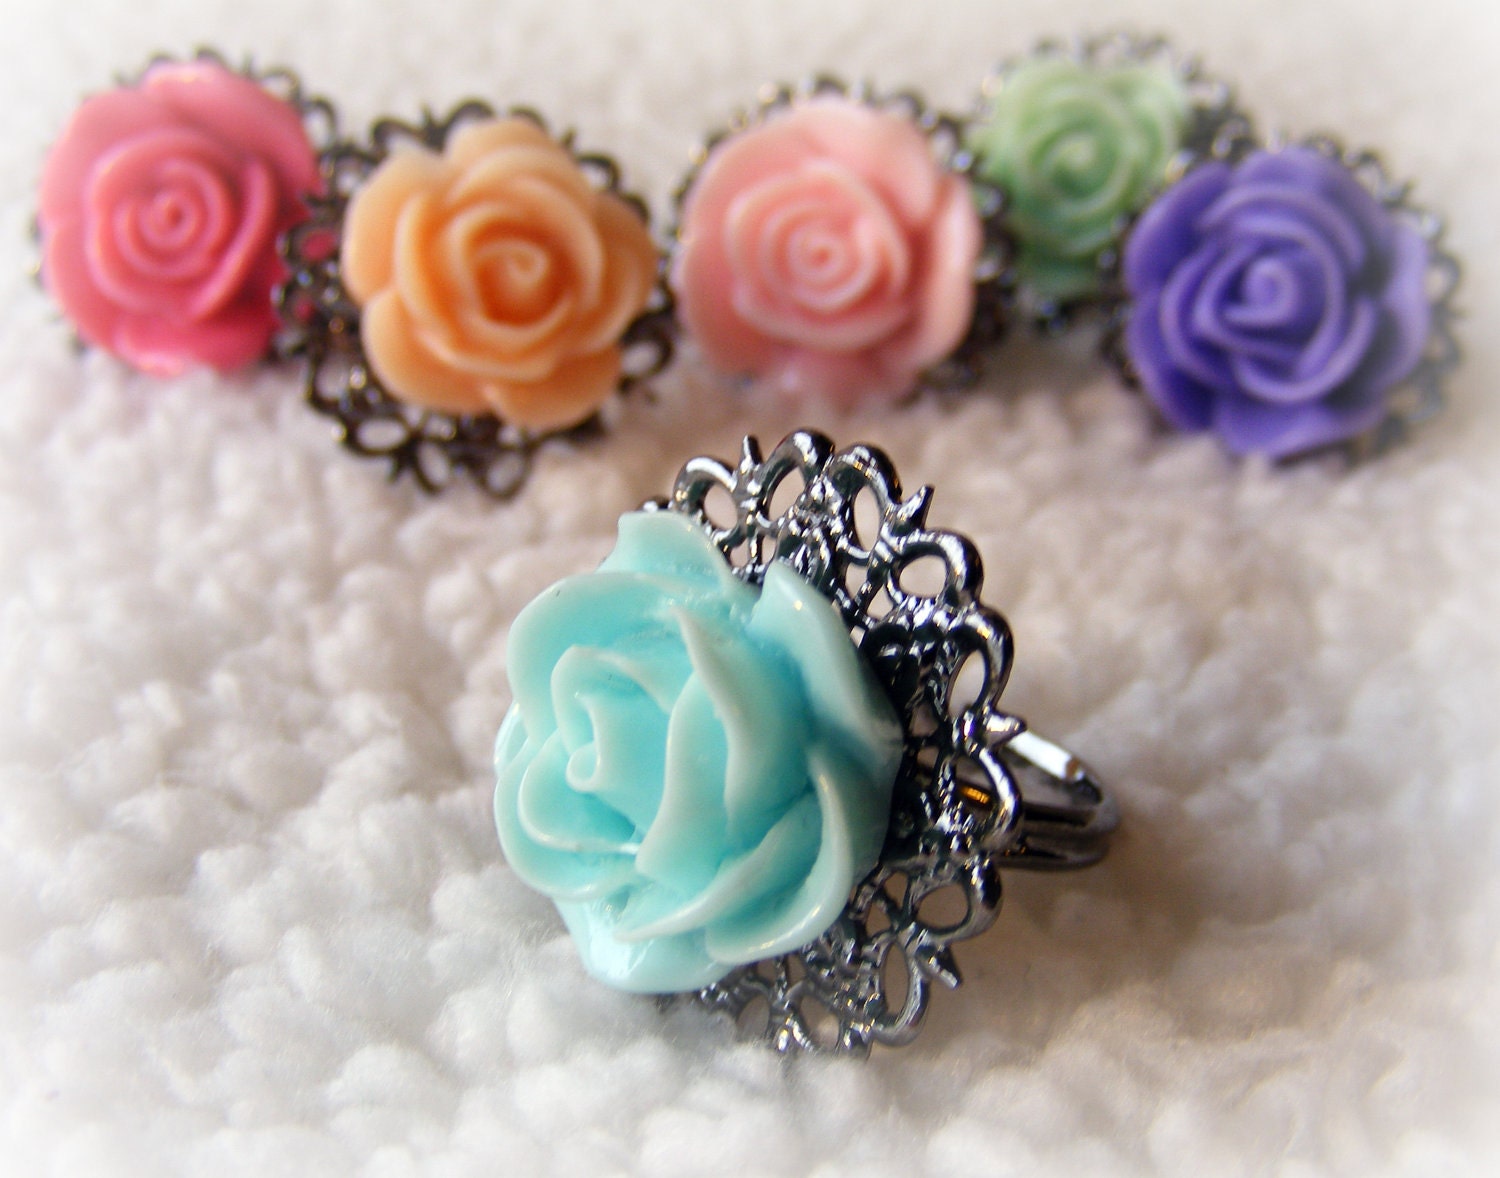 Ring Filigree Rose for Spring (your choice of color)